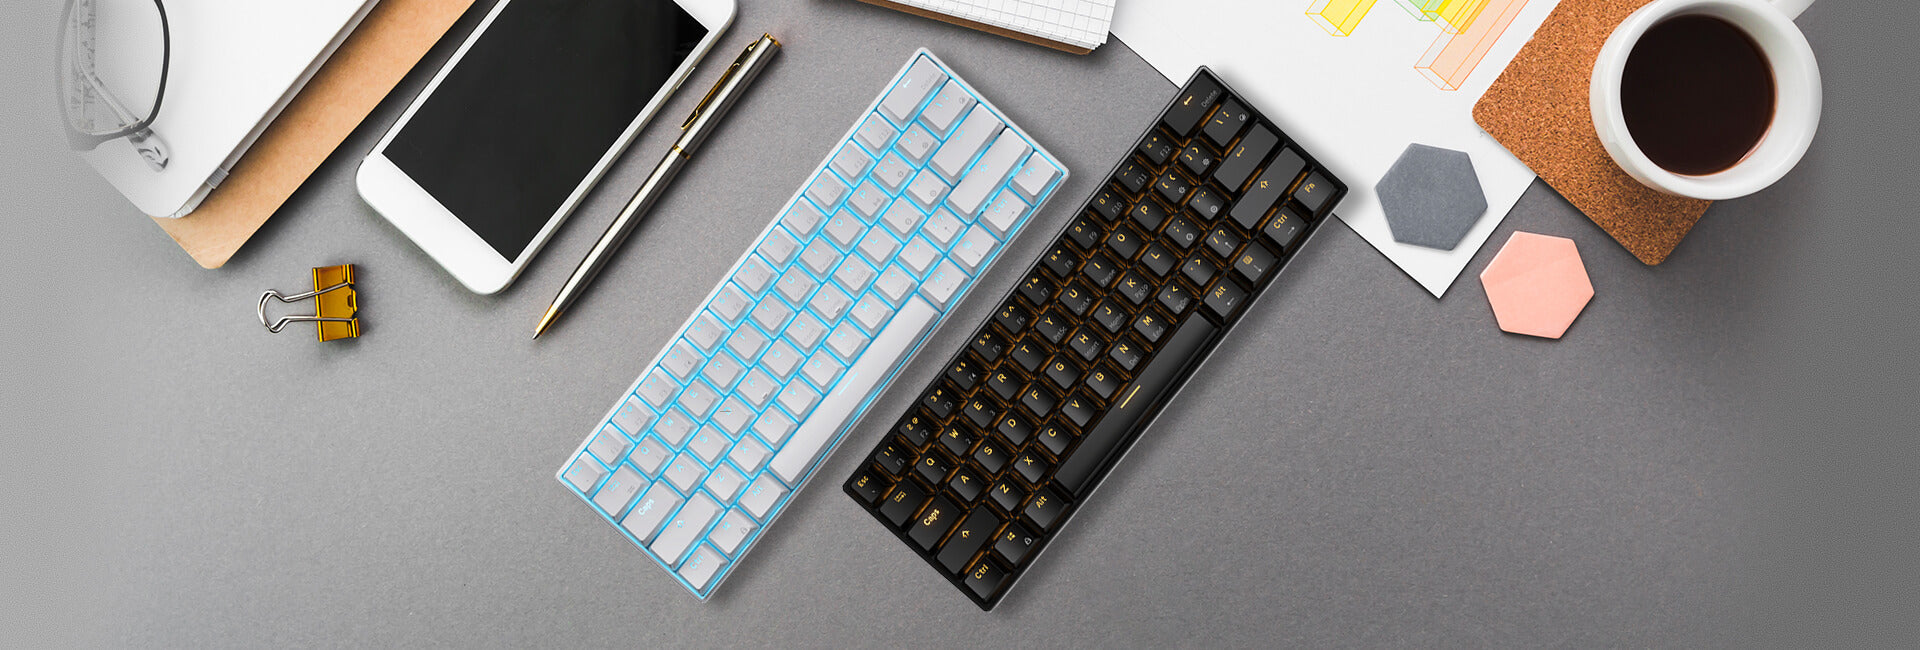 RK61 60 hot swappable keyboard